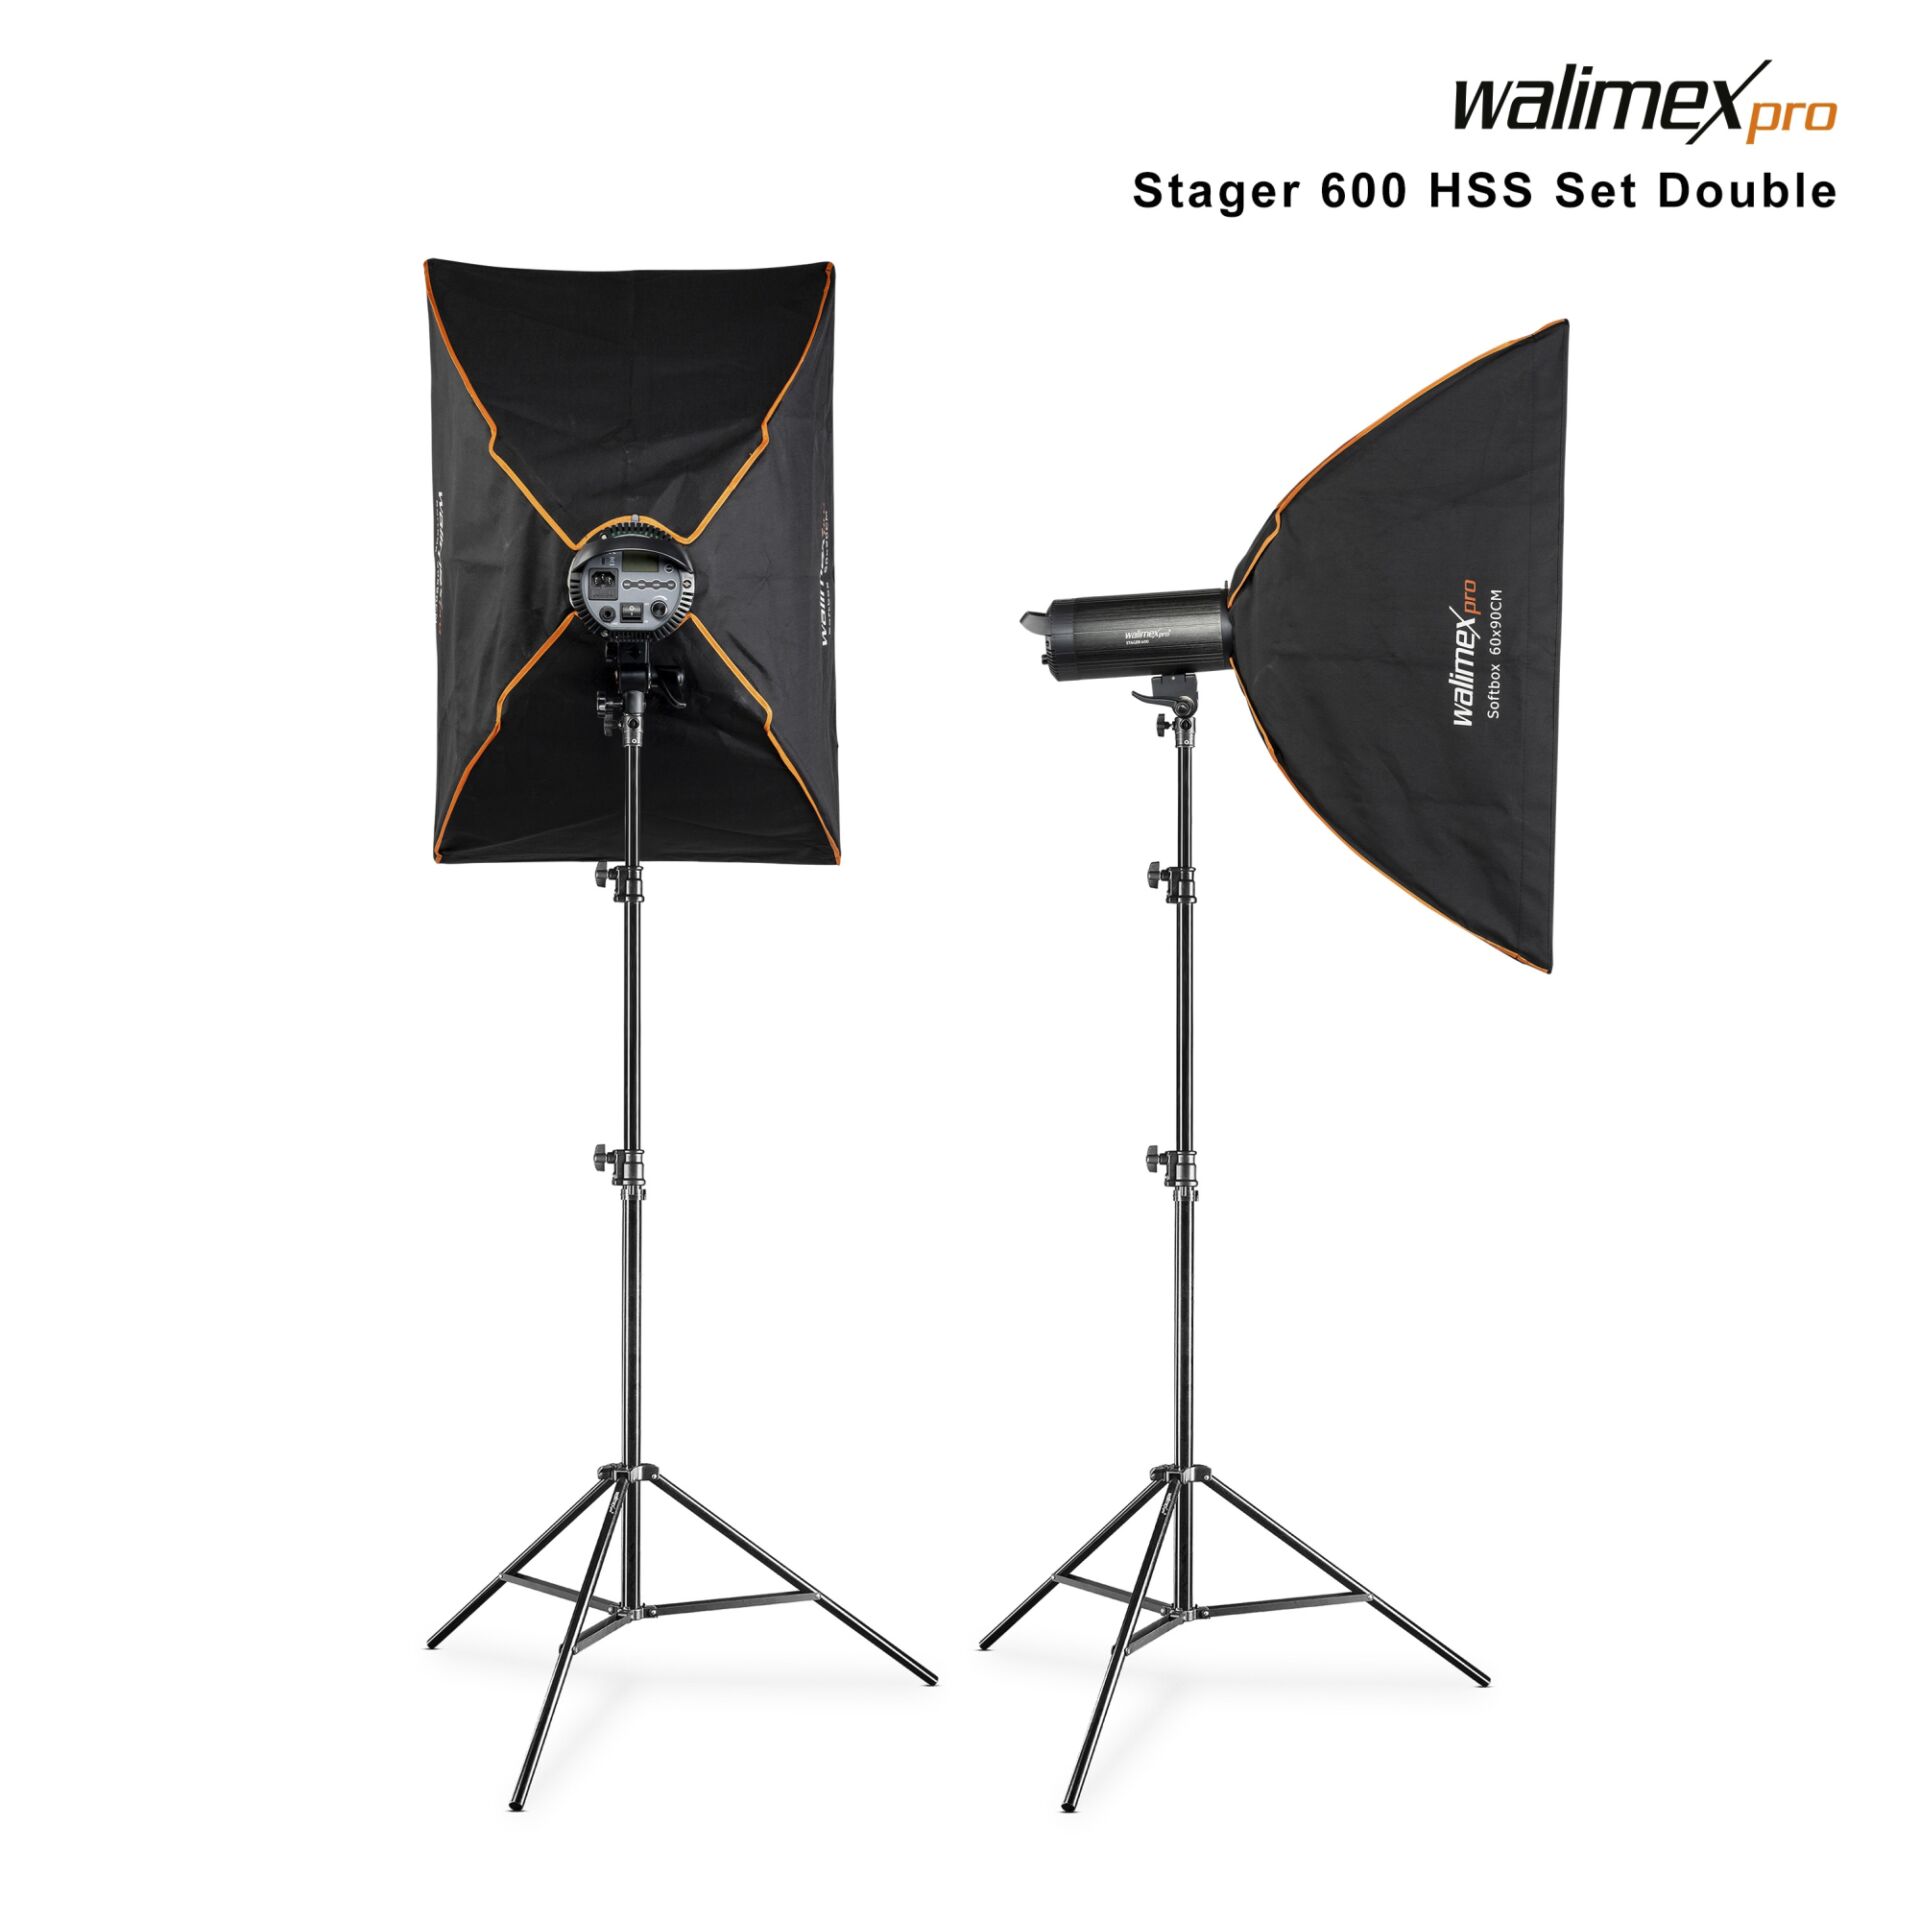 Walimex pro Stager 600 HSS kit Double